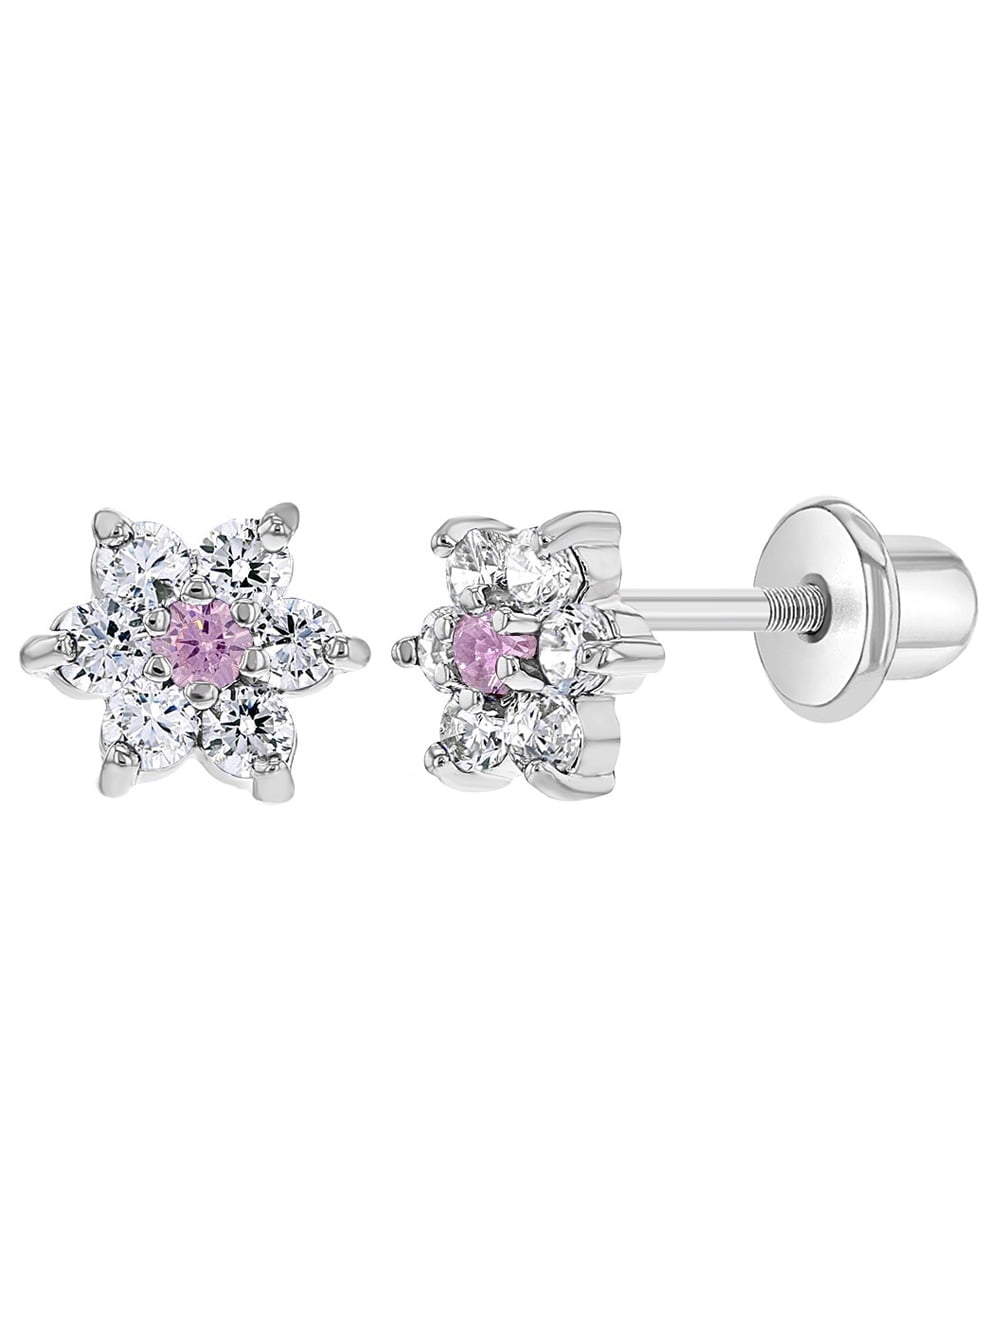 Details about   18K White Gold Plated Pink CZ Screw  Round Earrings for Baby Girls 5mm 